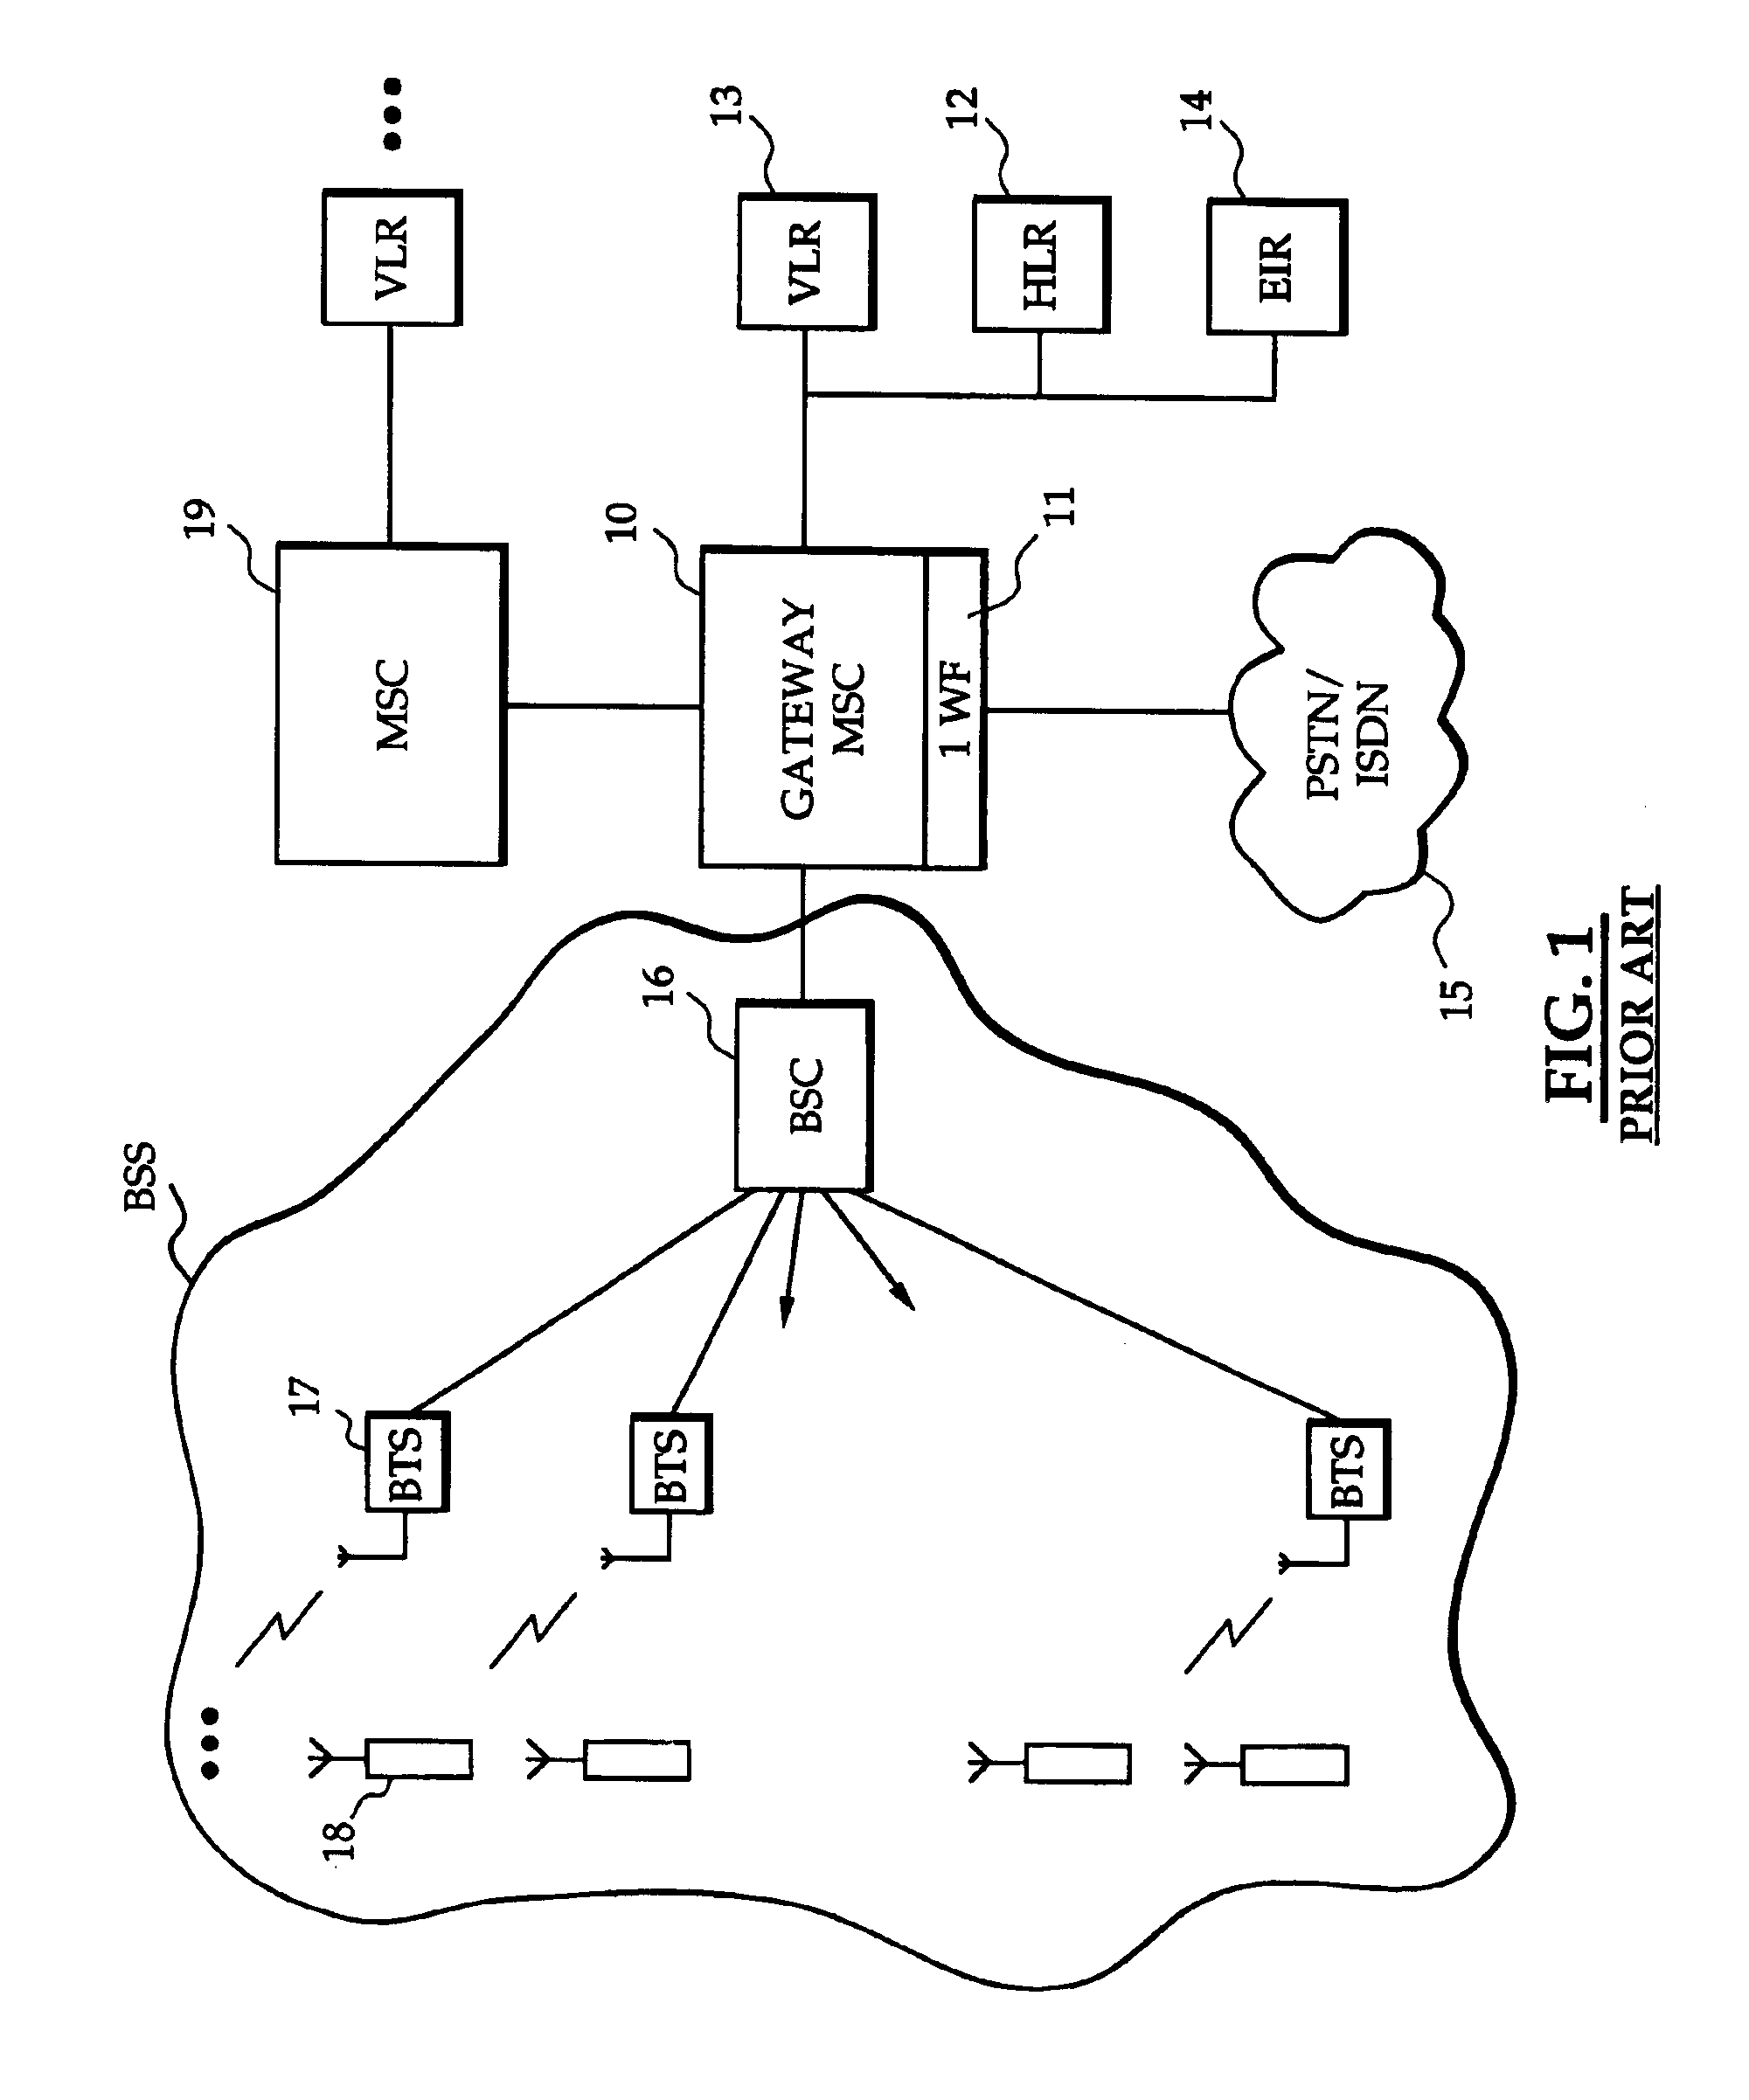 Method for establishing a call in the presence of outband indication of PSTN involvement at multimedia call setup